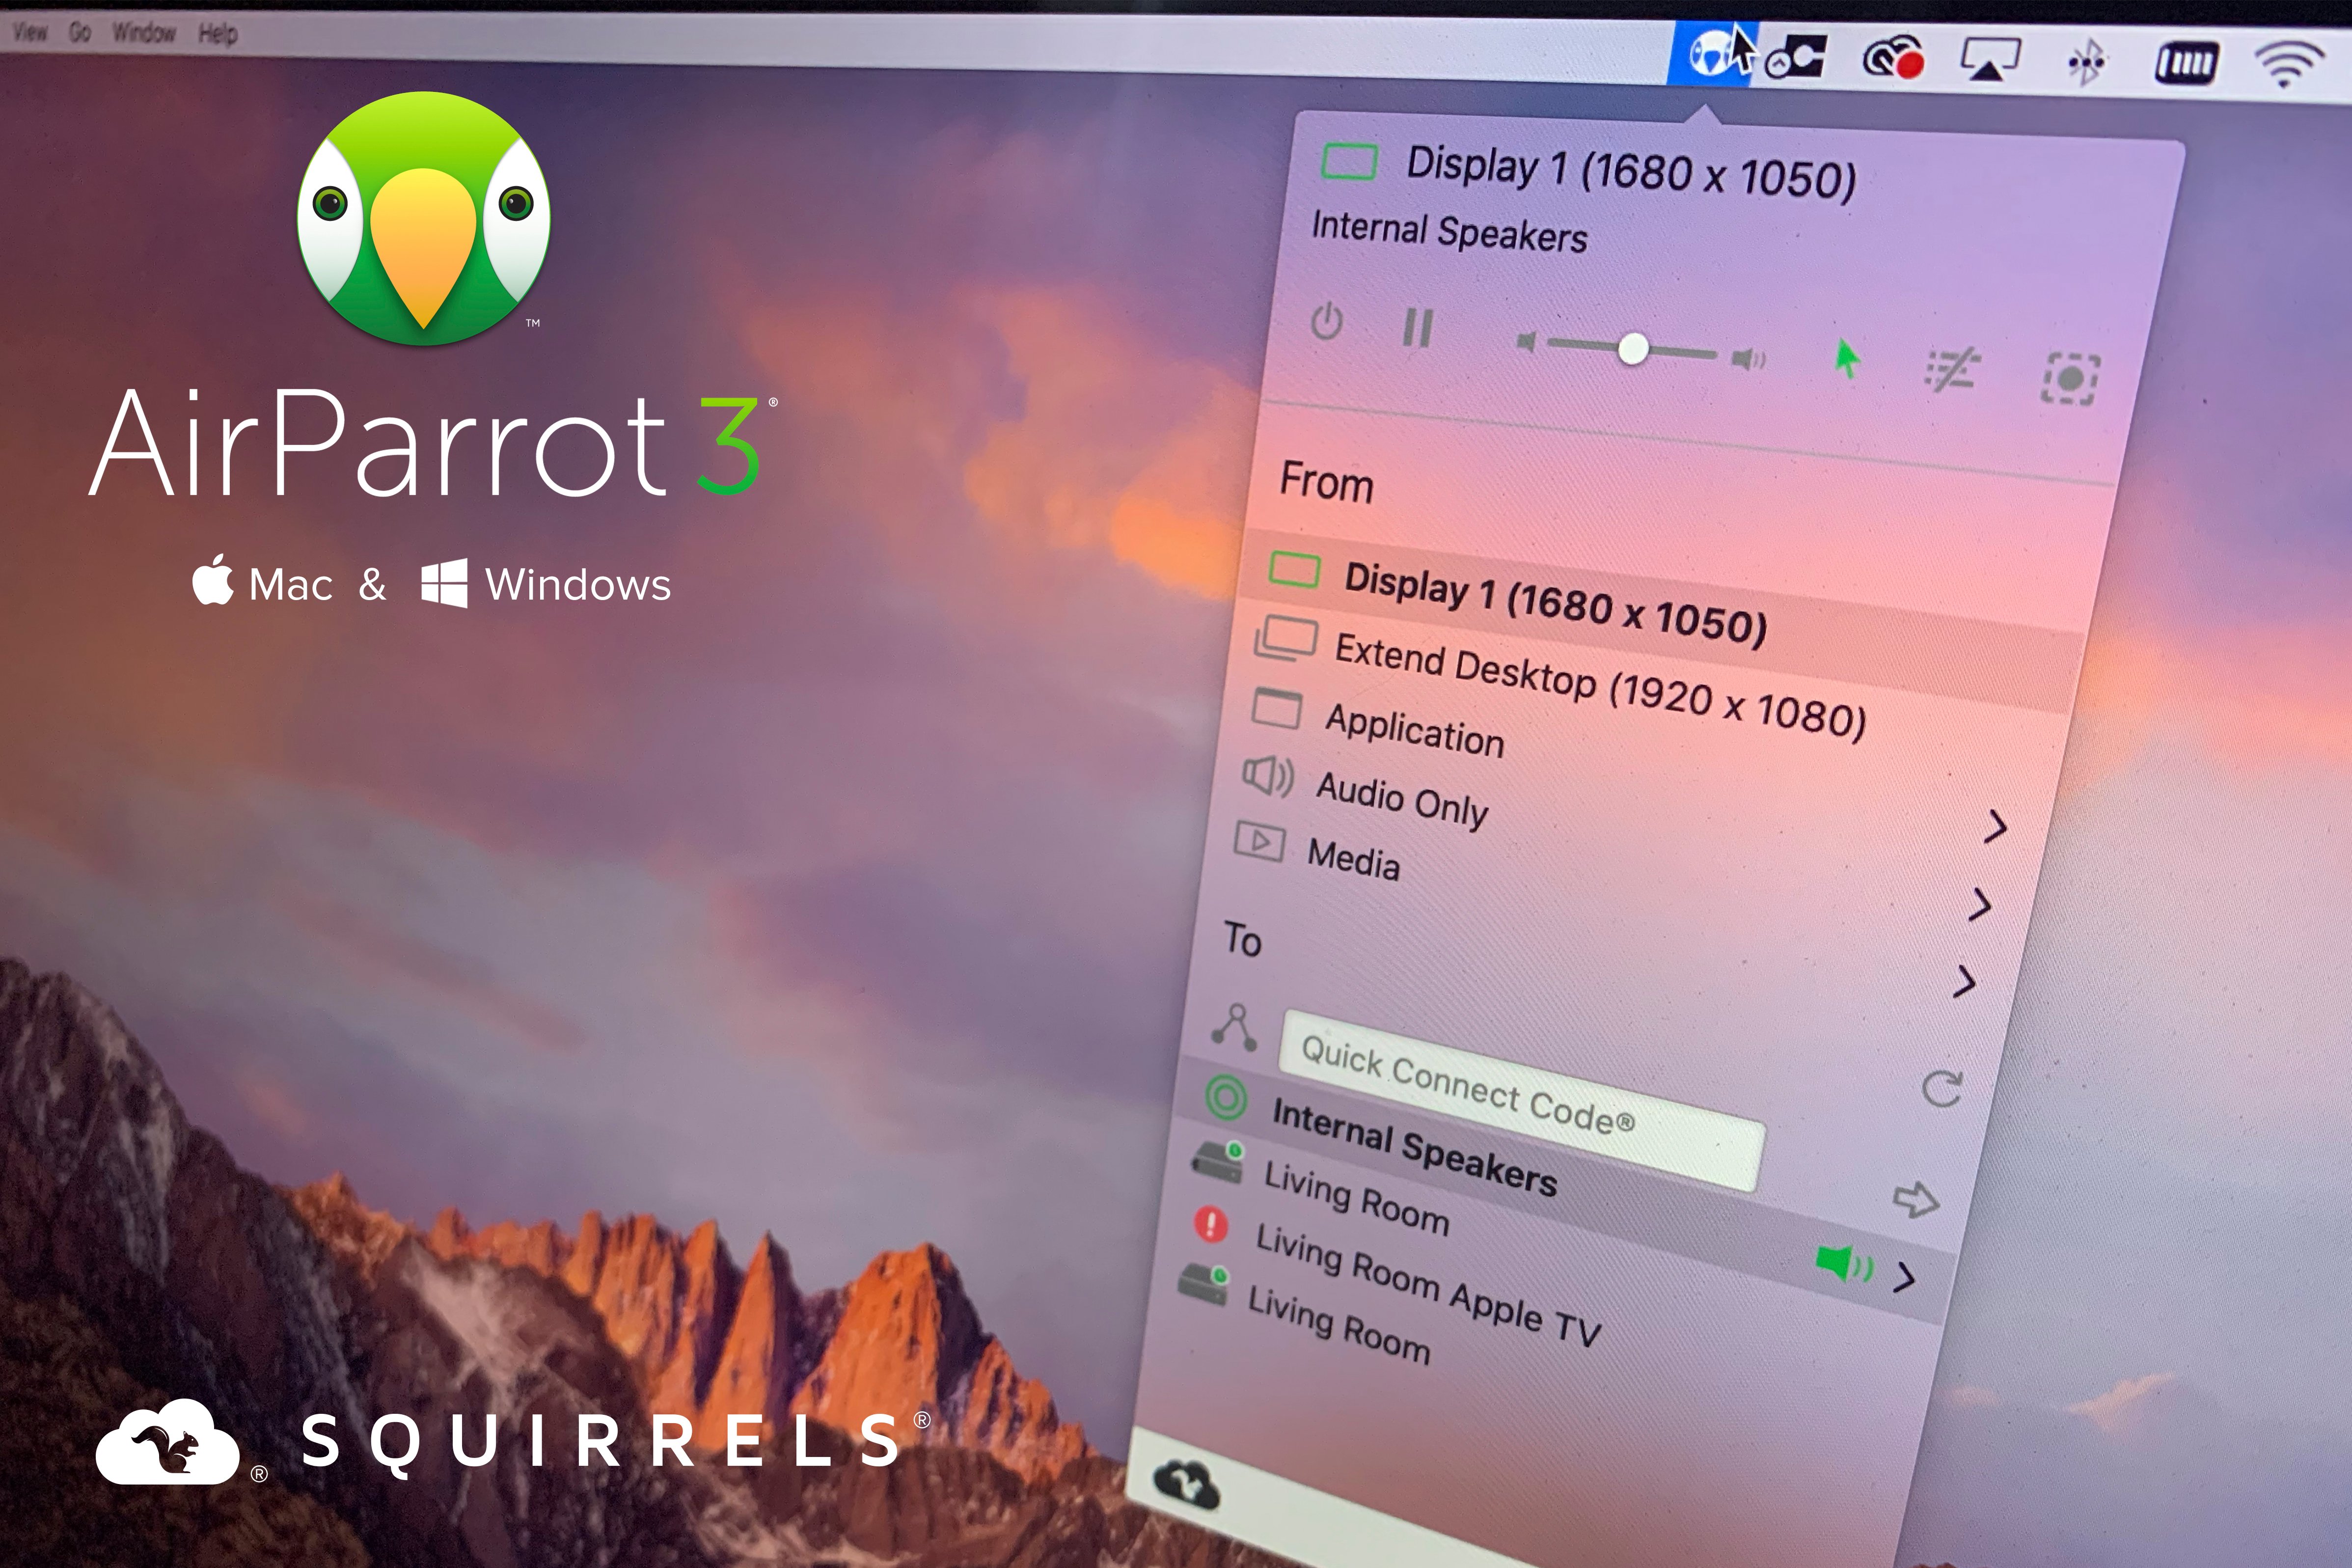 Introducing AirParrot 3: The Most Powerful Screen Mirroring and Media Streaming Yet - Featured Image